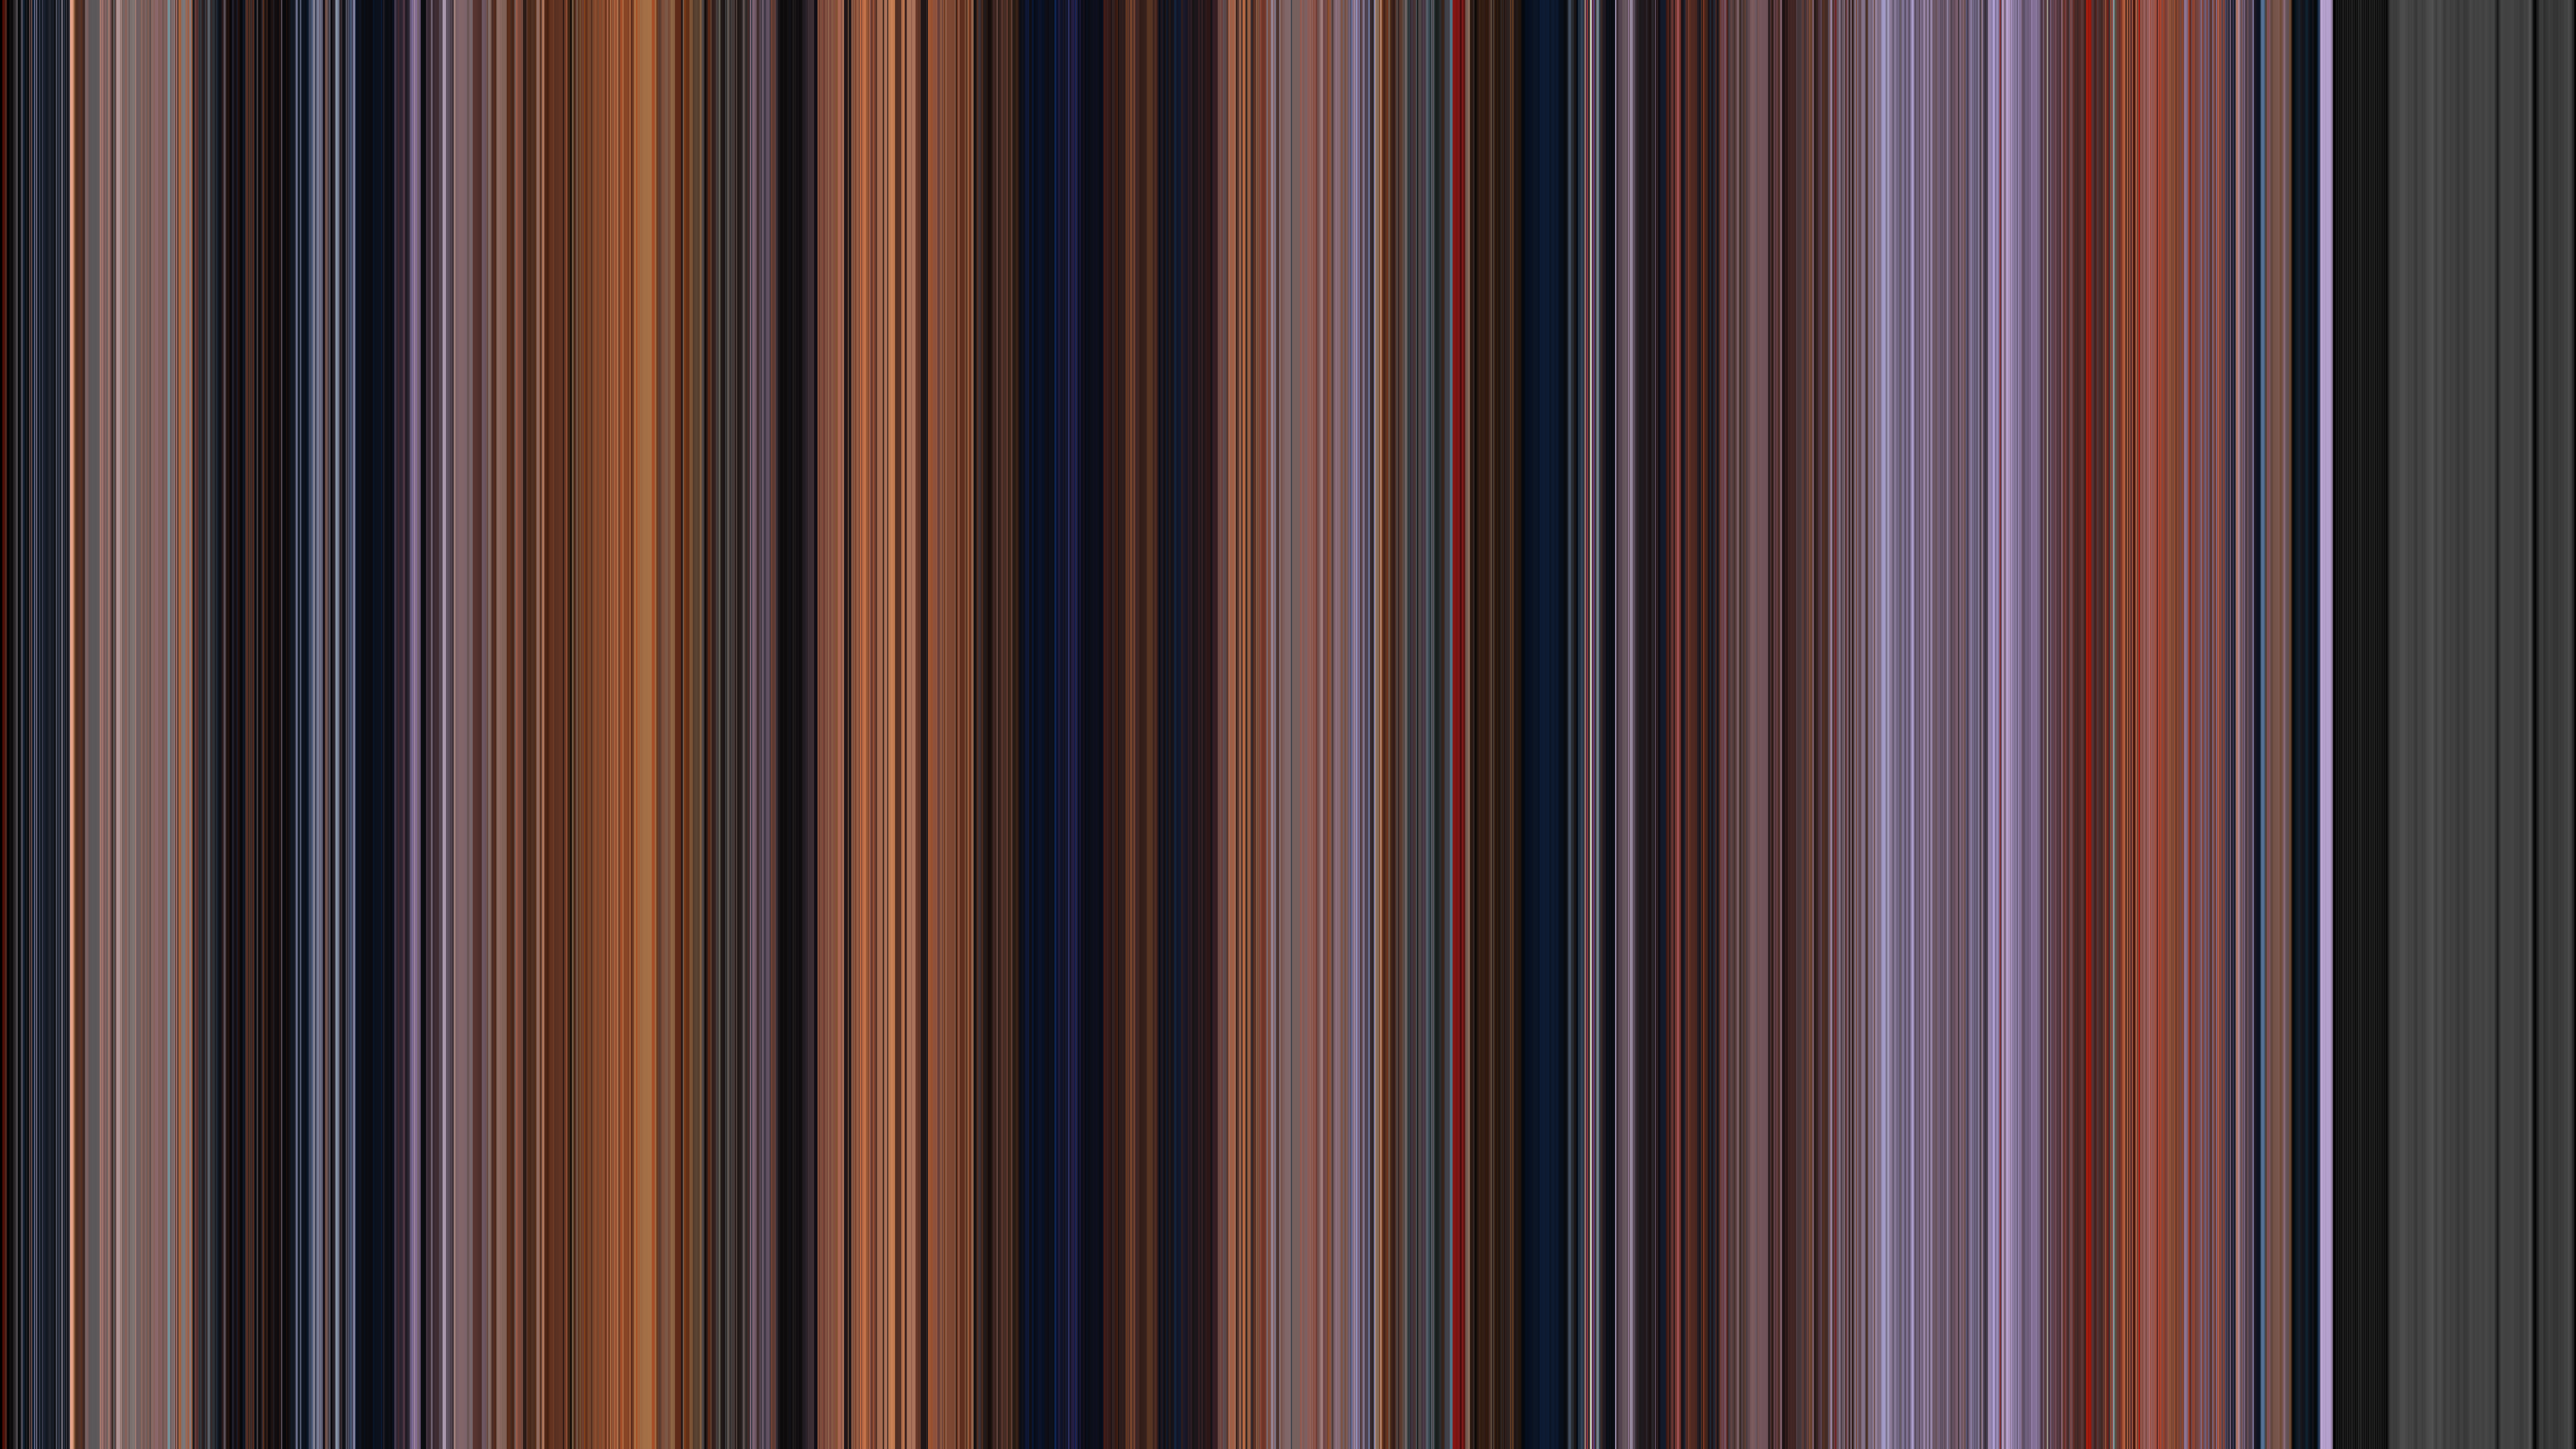 Example output from The Iron Giant showing thousands of single-color vertical lines consisting mostly of dark blues and oranges with some light blue sections towards the end.